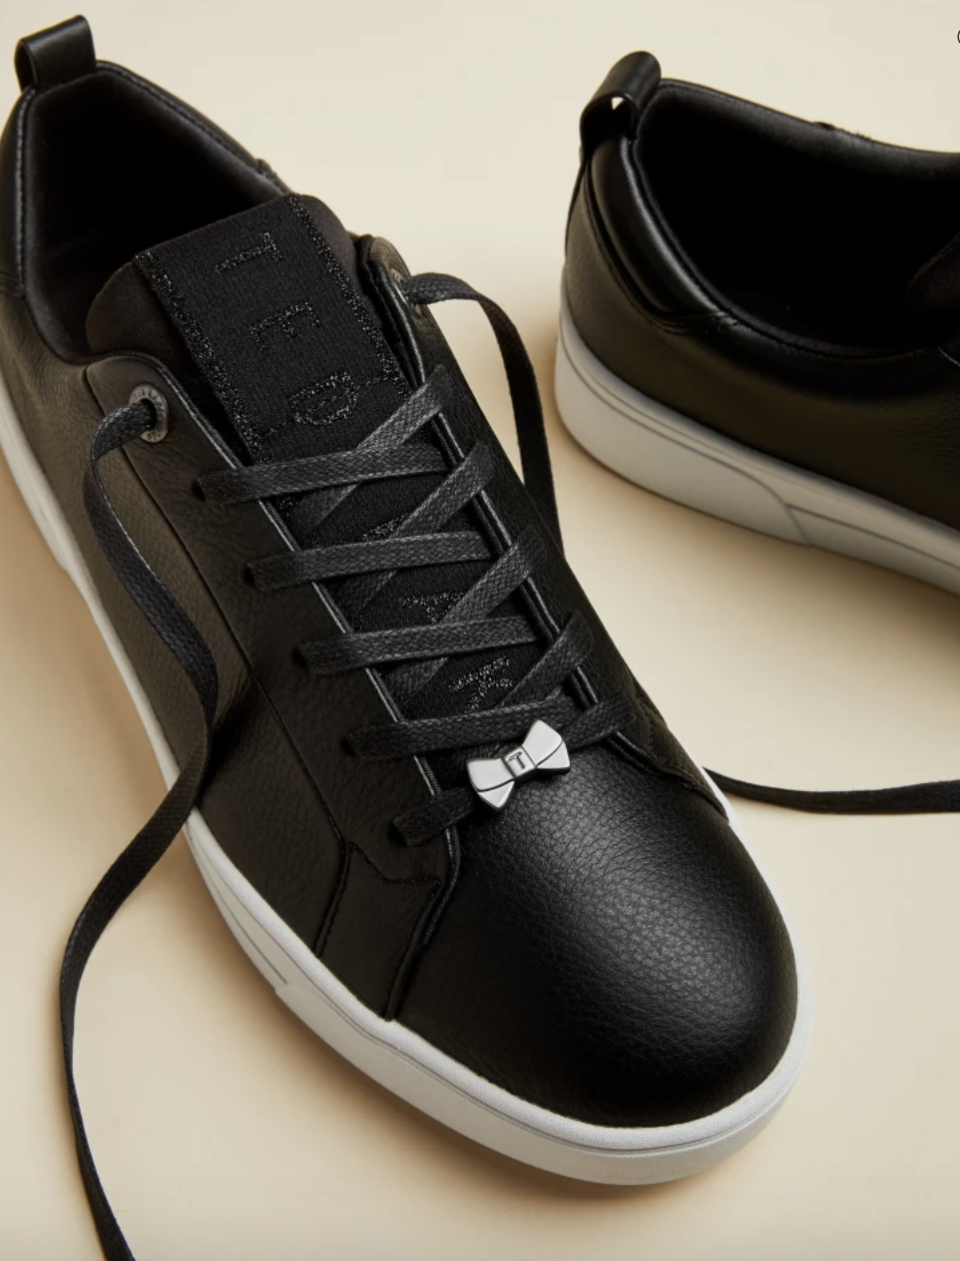 Branded leather trainers, £71 (was £119). PHOTO: Ted Baker